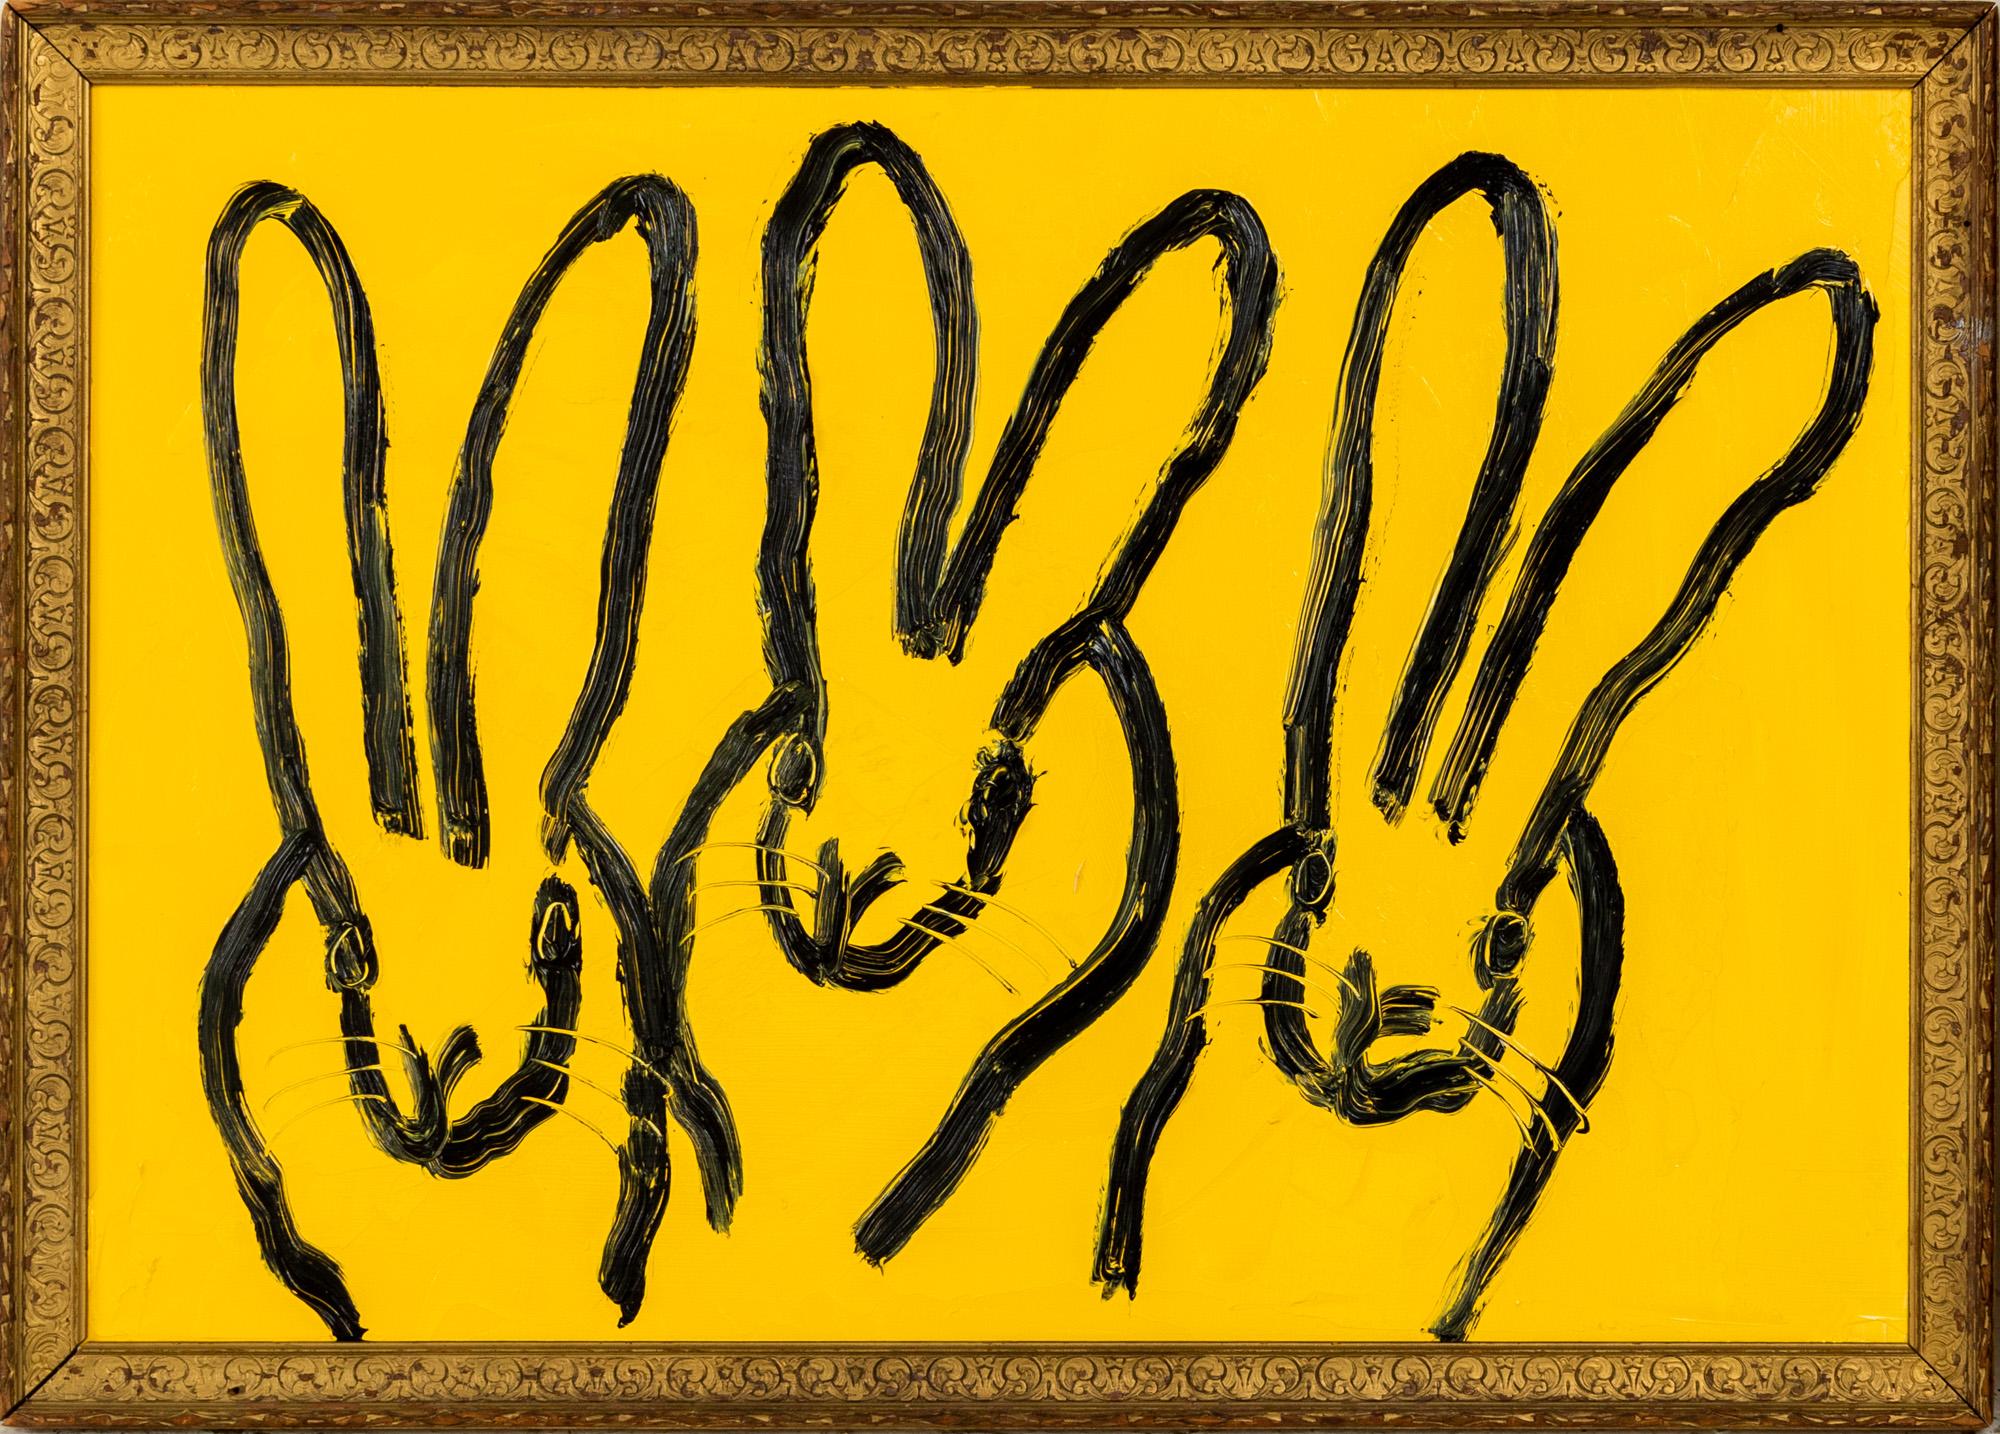 "3 Play Monday" is a framed oil painting on wood by Hunt Slonem, depicting a hutch of rabbits set against a vibrant yellow background. 

This piece is finished in an antique frame, which has been hand-selected by the artist for this painting. The